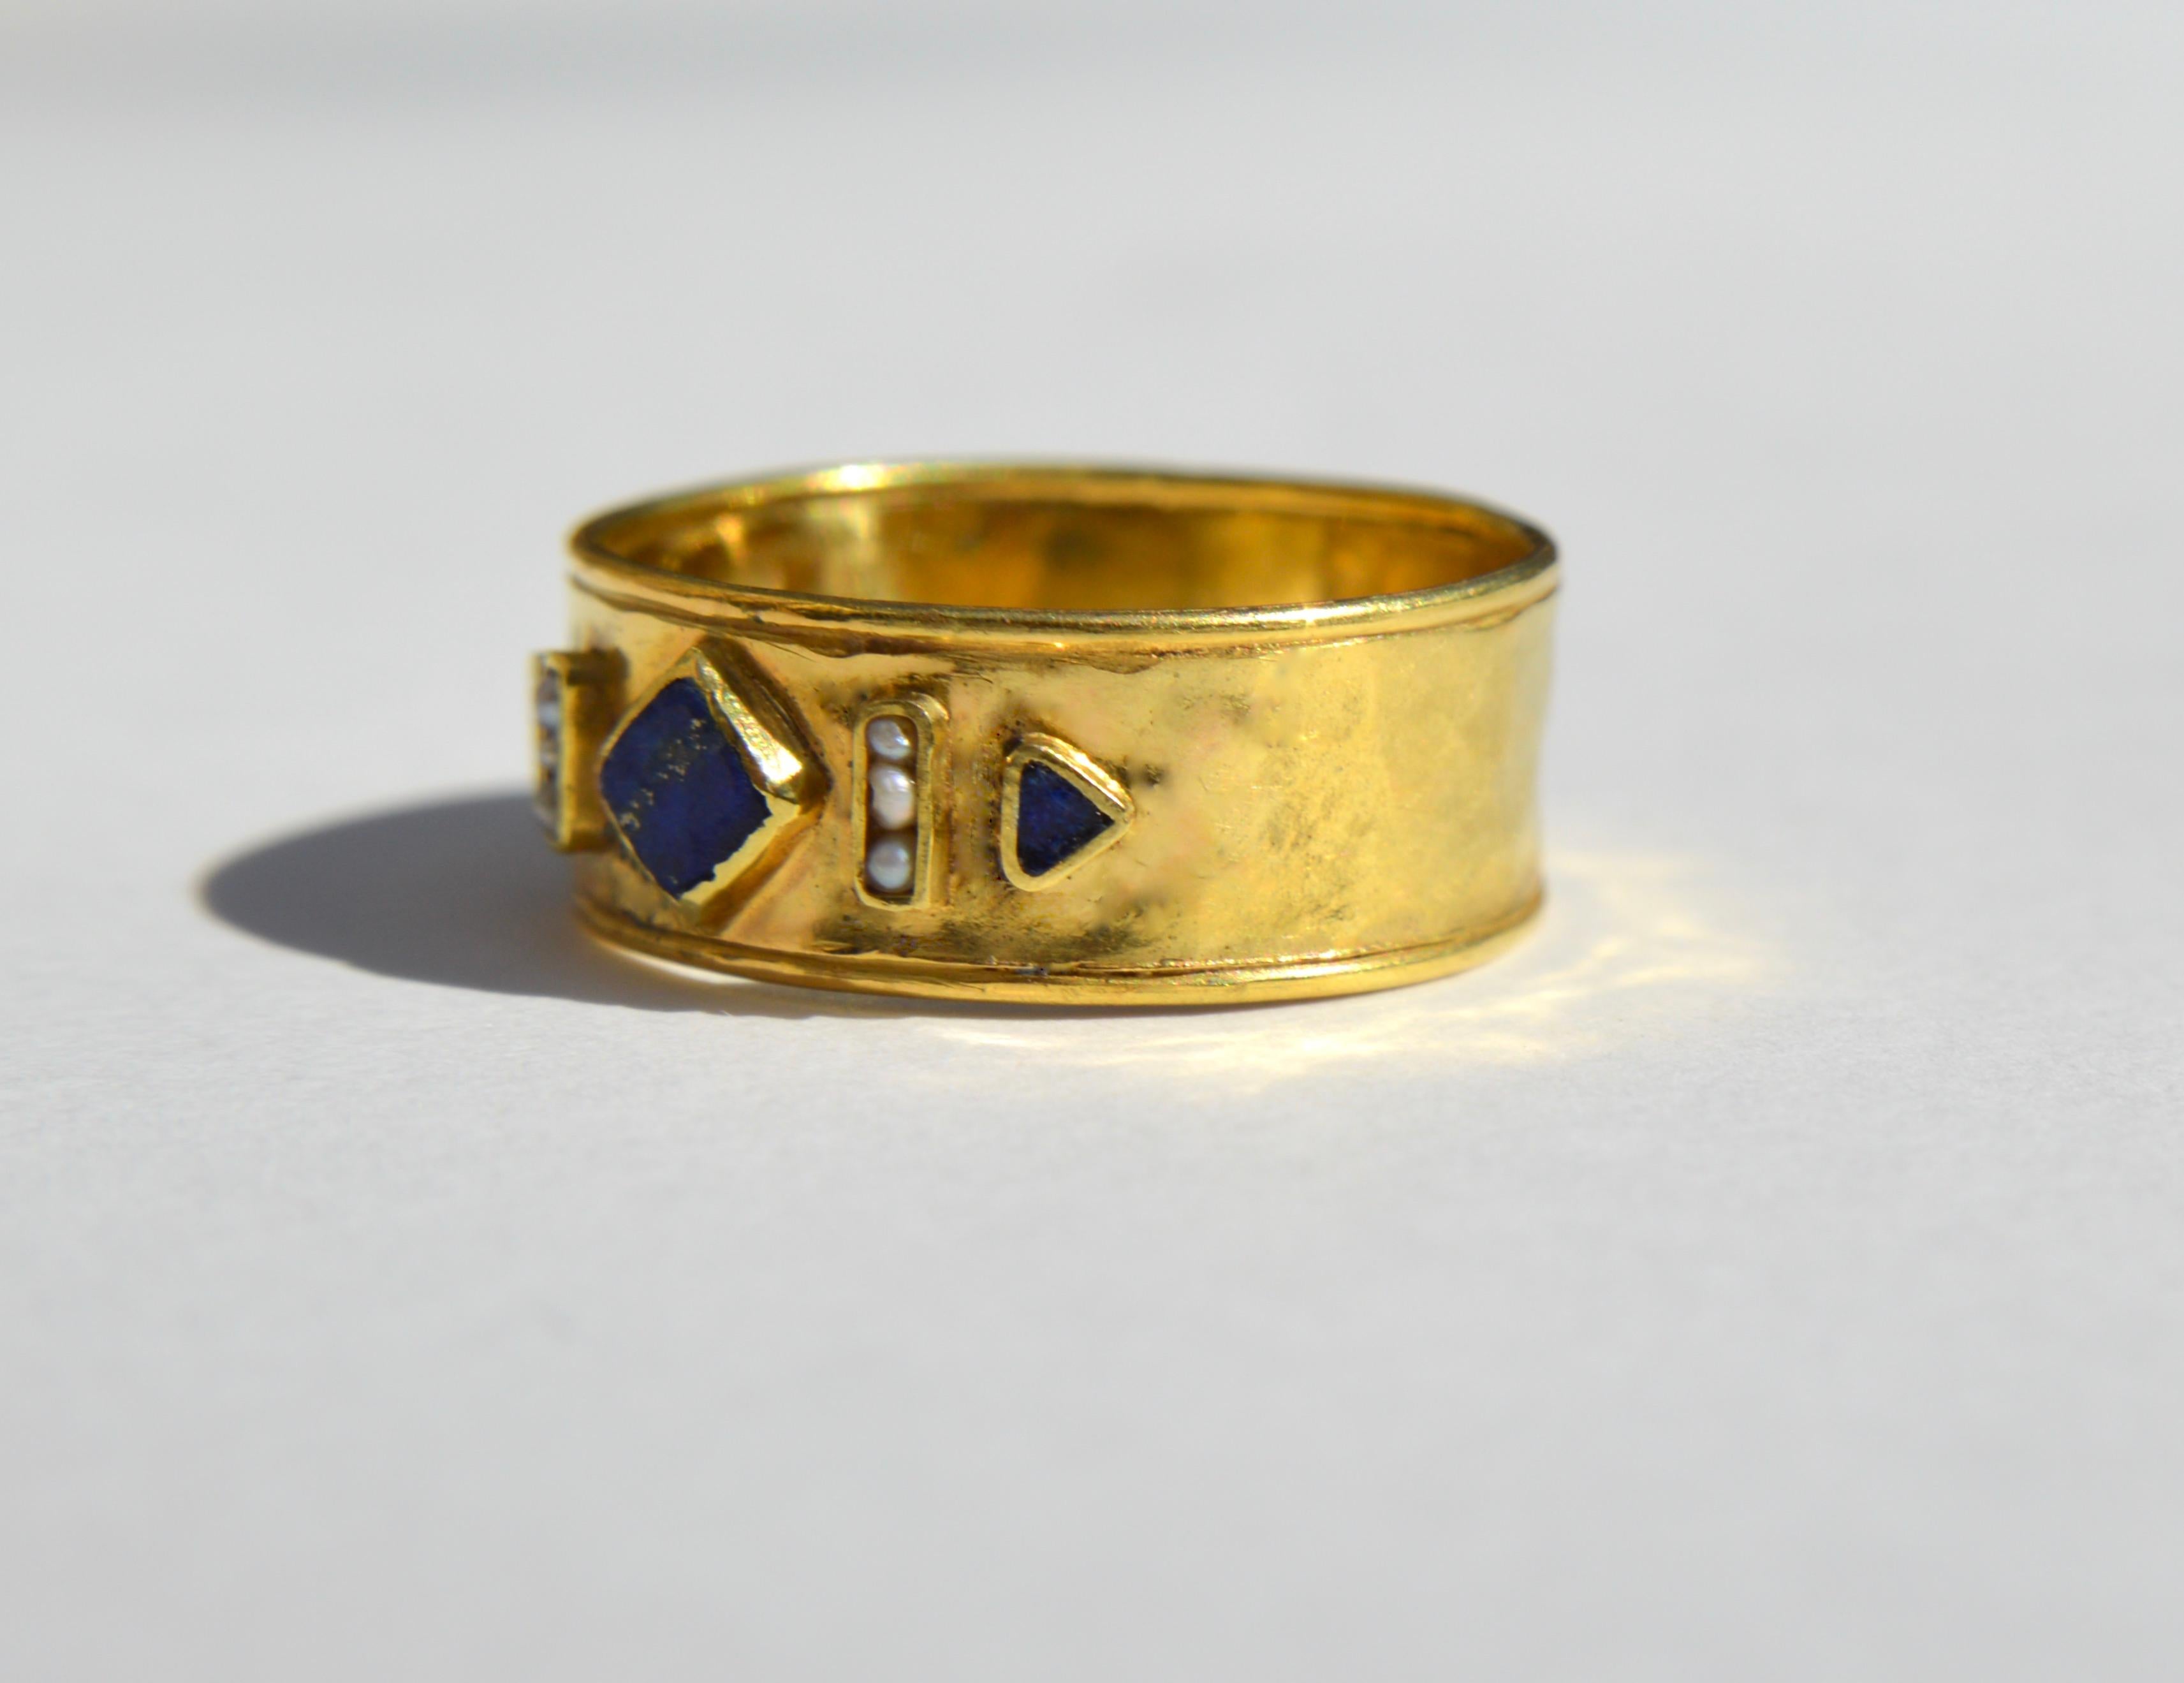 Beautiful vintage midcentury circa 1960s lapis lazuli and freshwater seed pearl 18K yellow gold Etruscan revival hammered wide cigar band ring. Size 8.5. Not recommended for resizing. Band measures 8mm wide. Center lapis stone measures 5x5mm. In